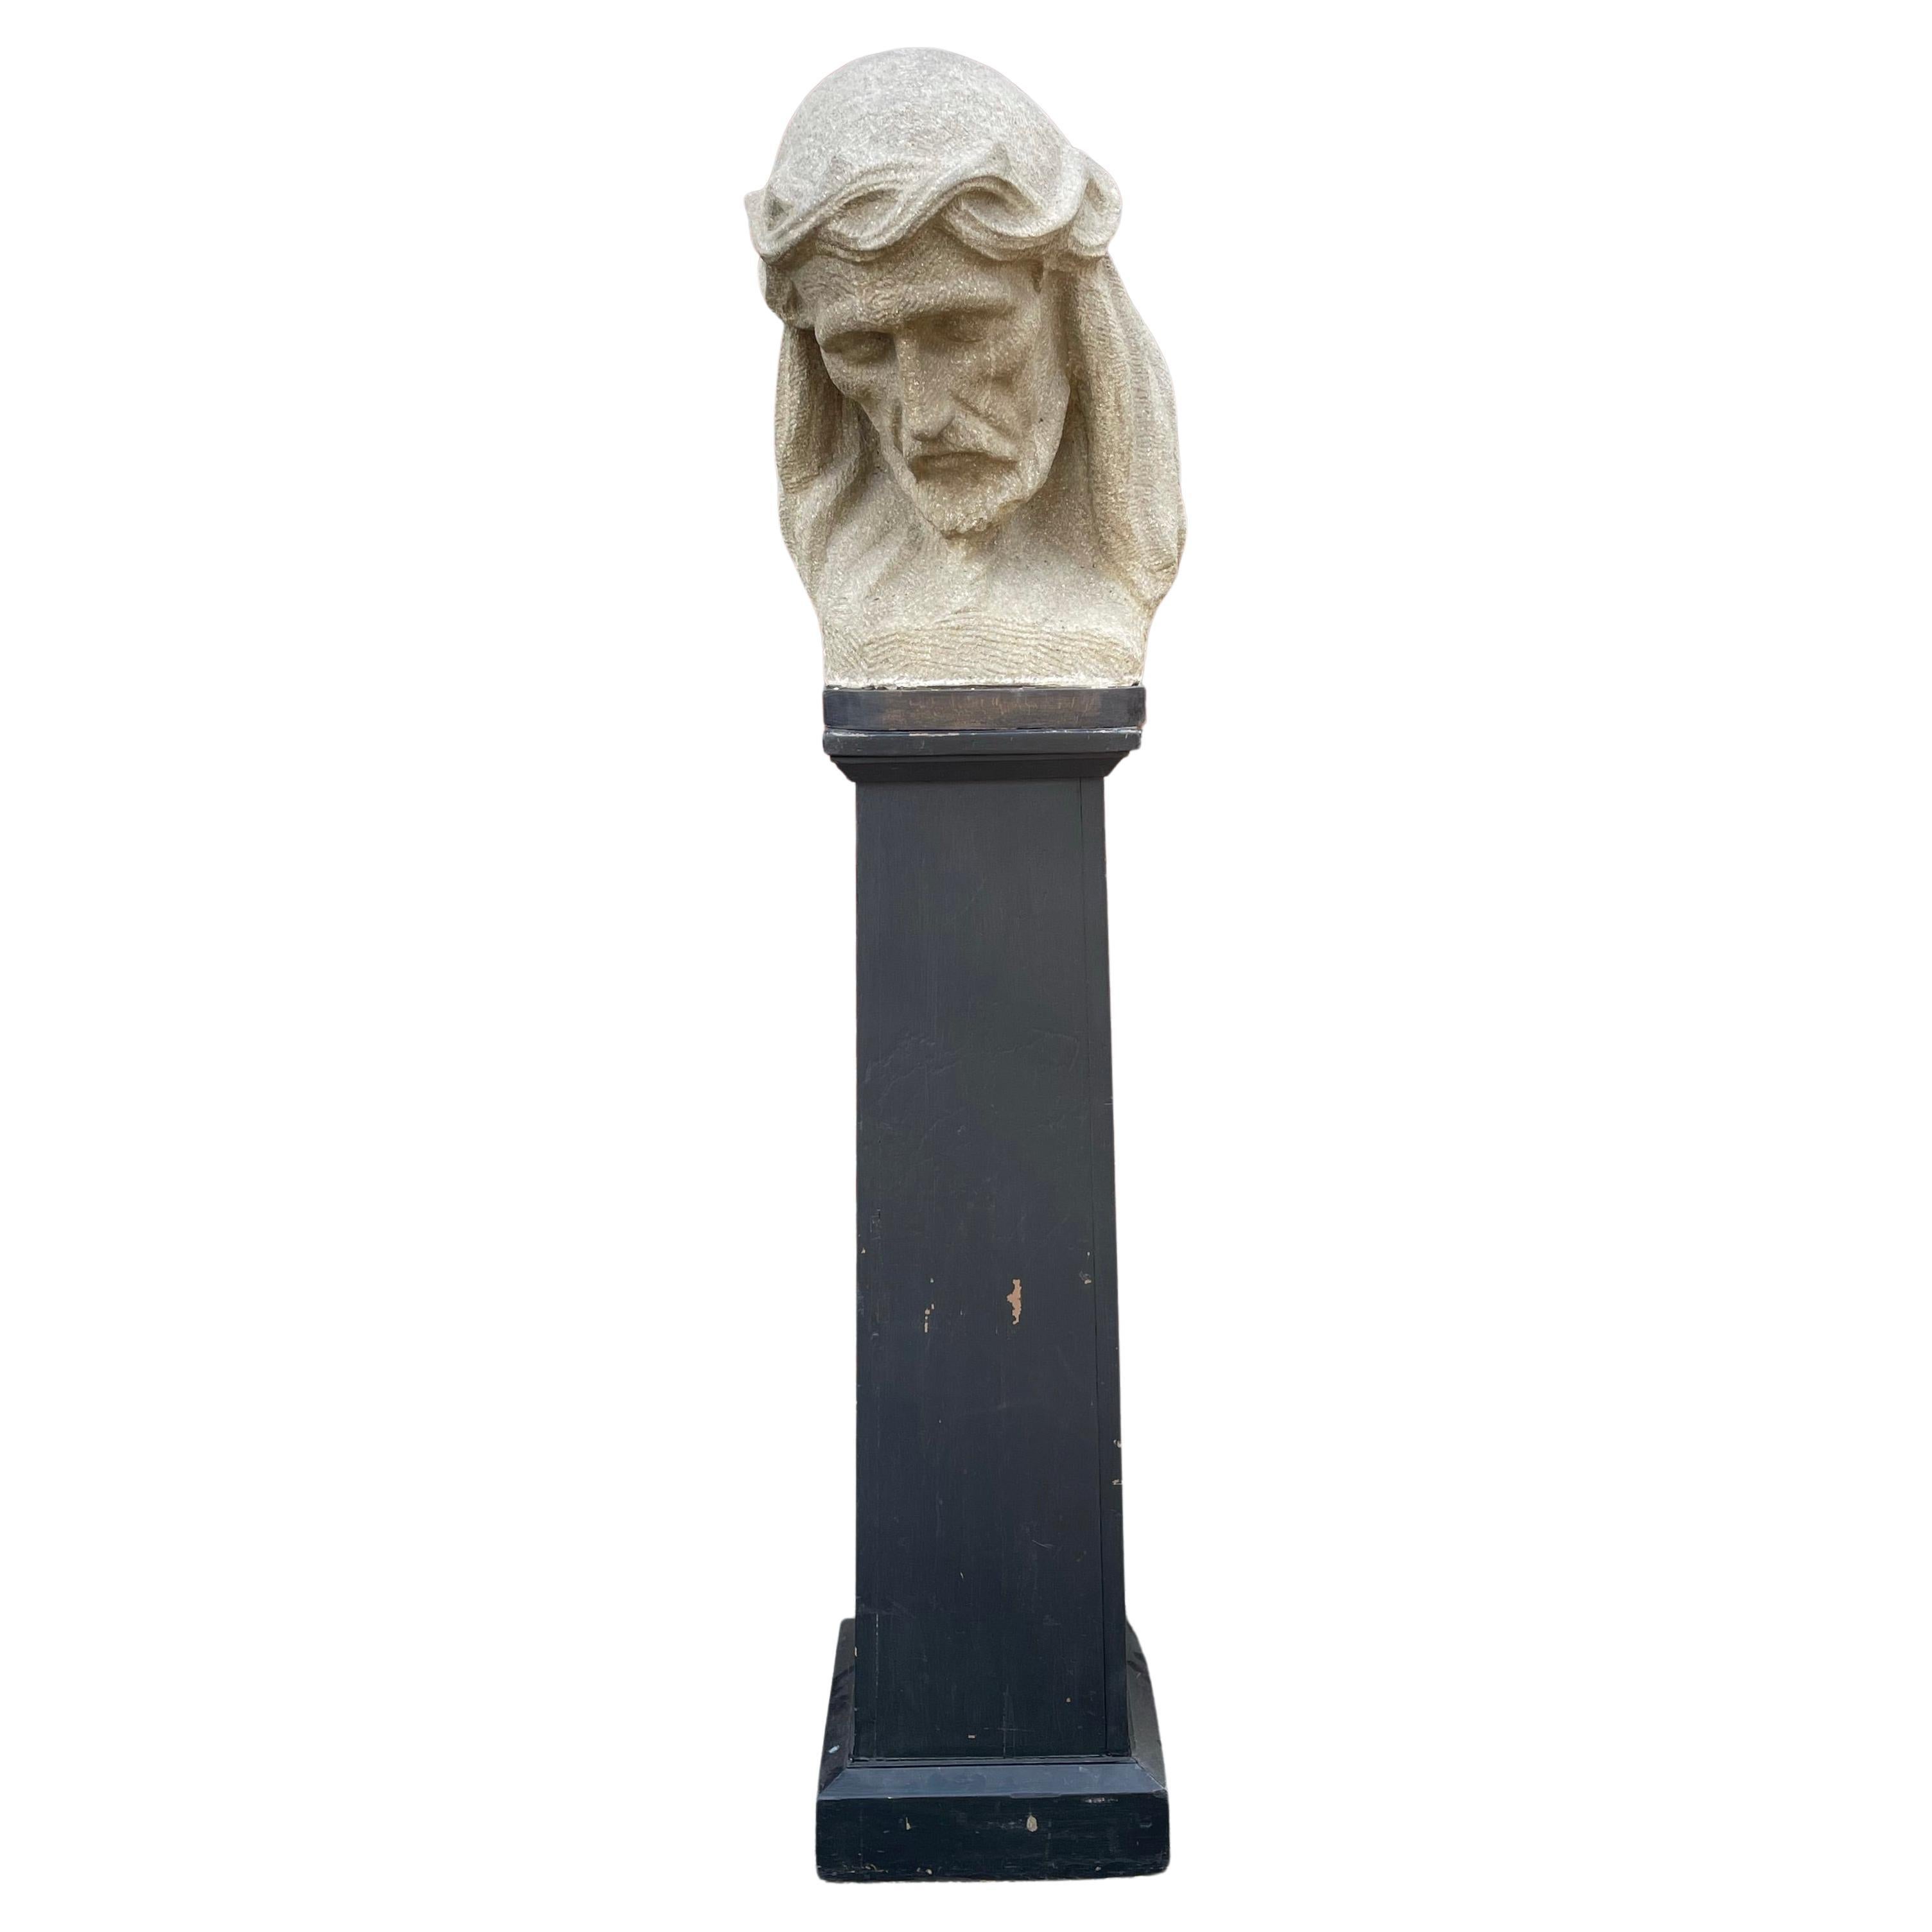 Large Antique Hand Carved Sandstone Sculpture, Bust of Christ with Display Stand For Sale